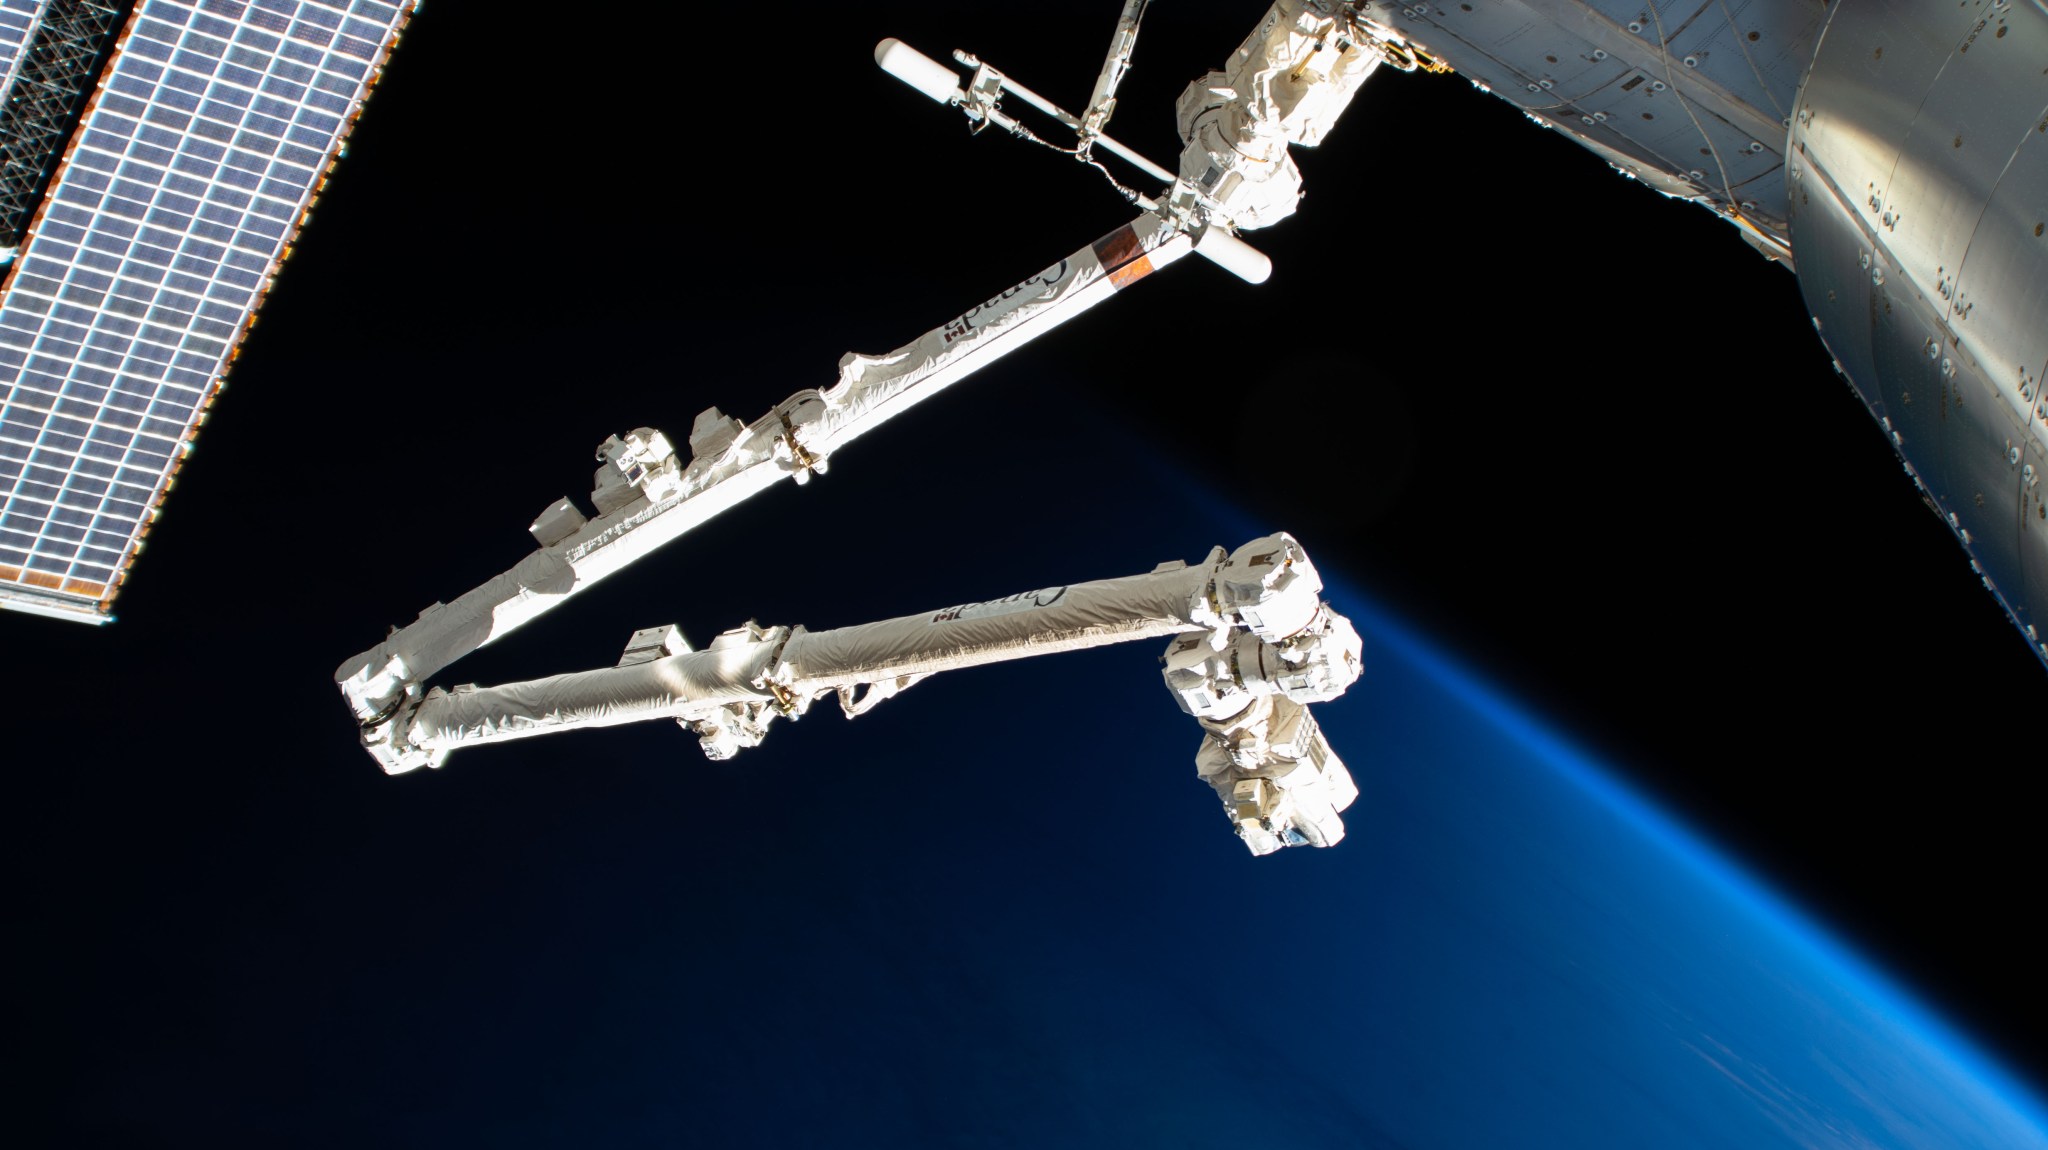 Robot arms for the International Space Station.